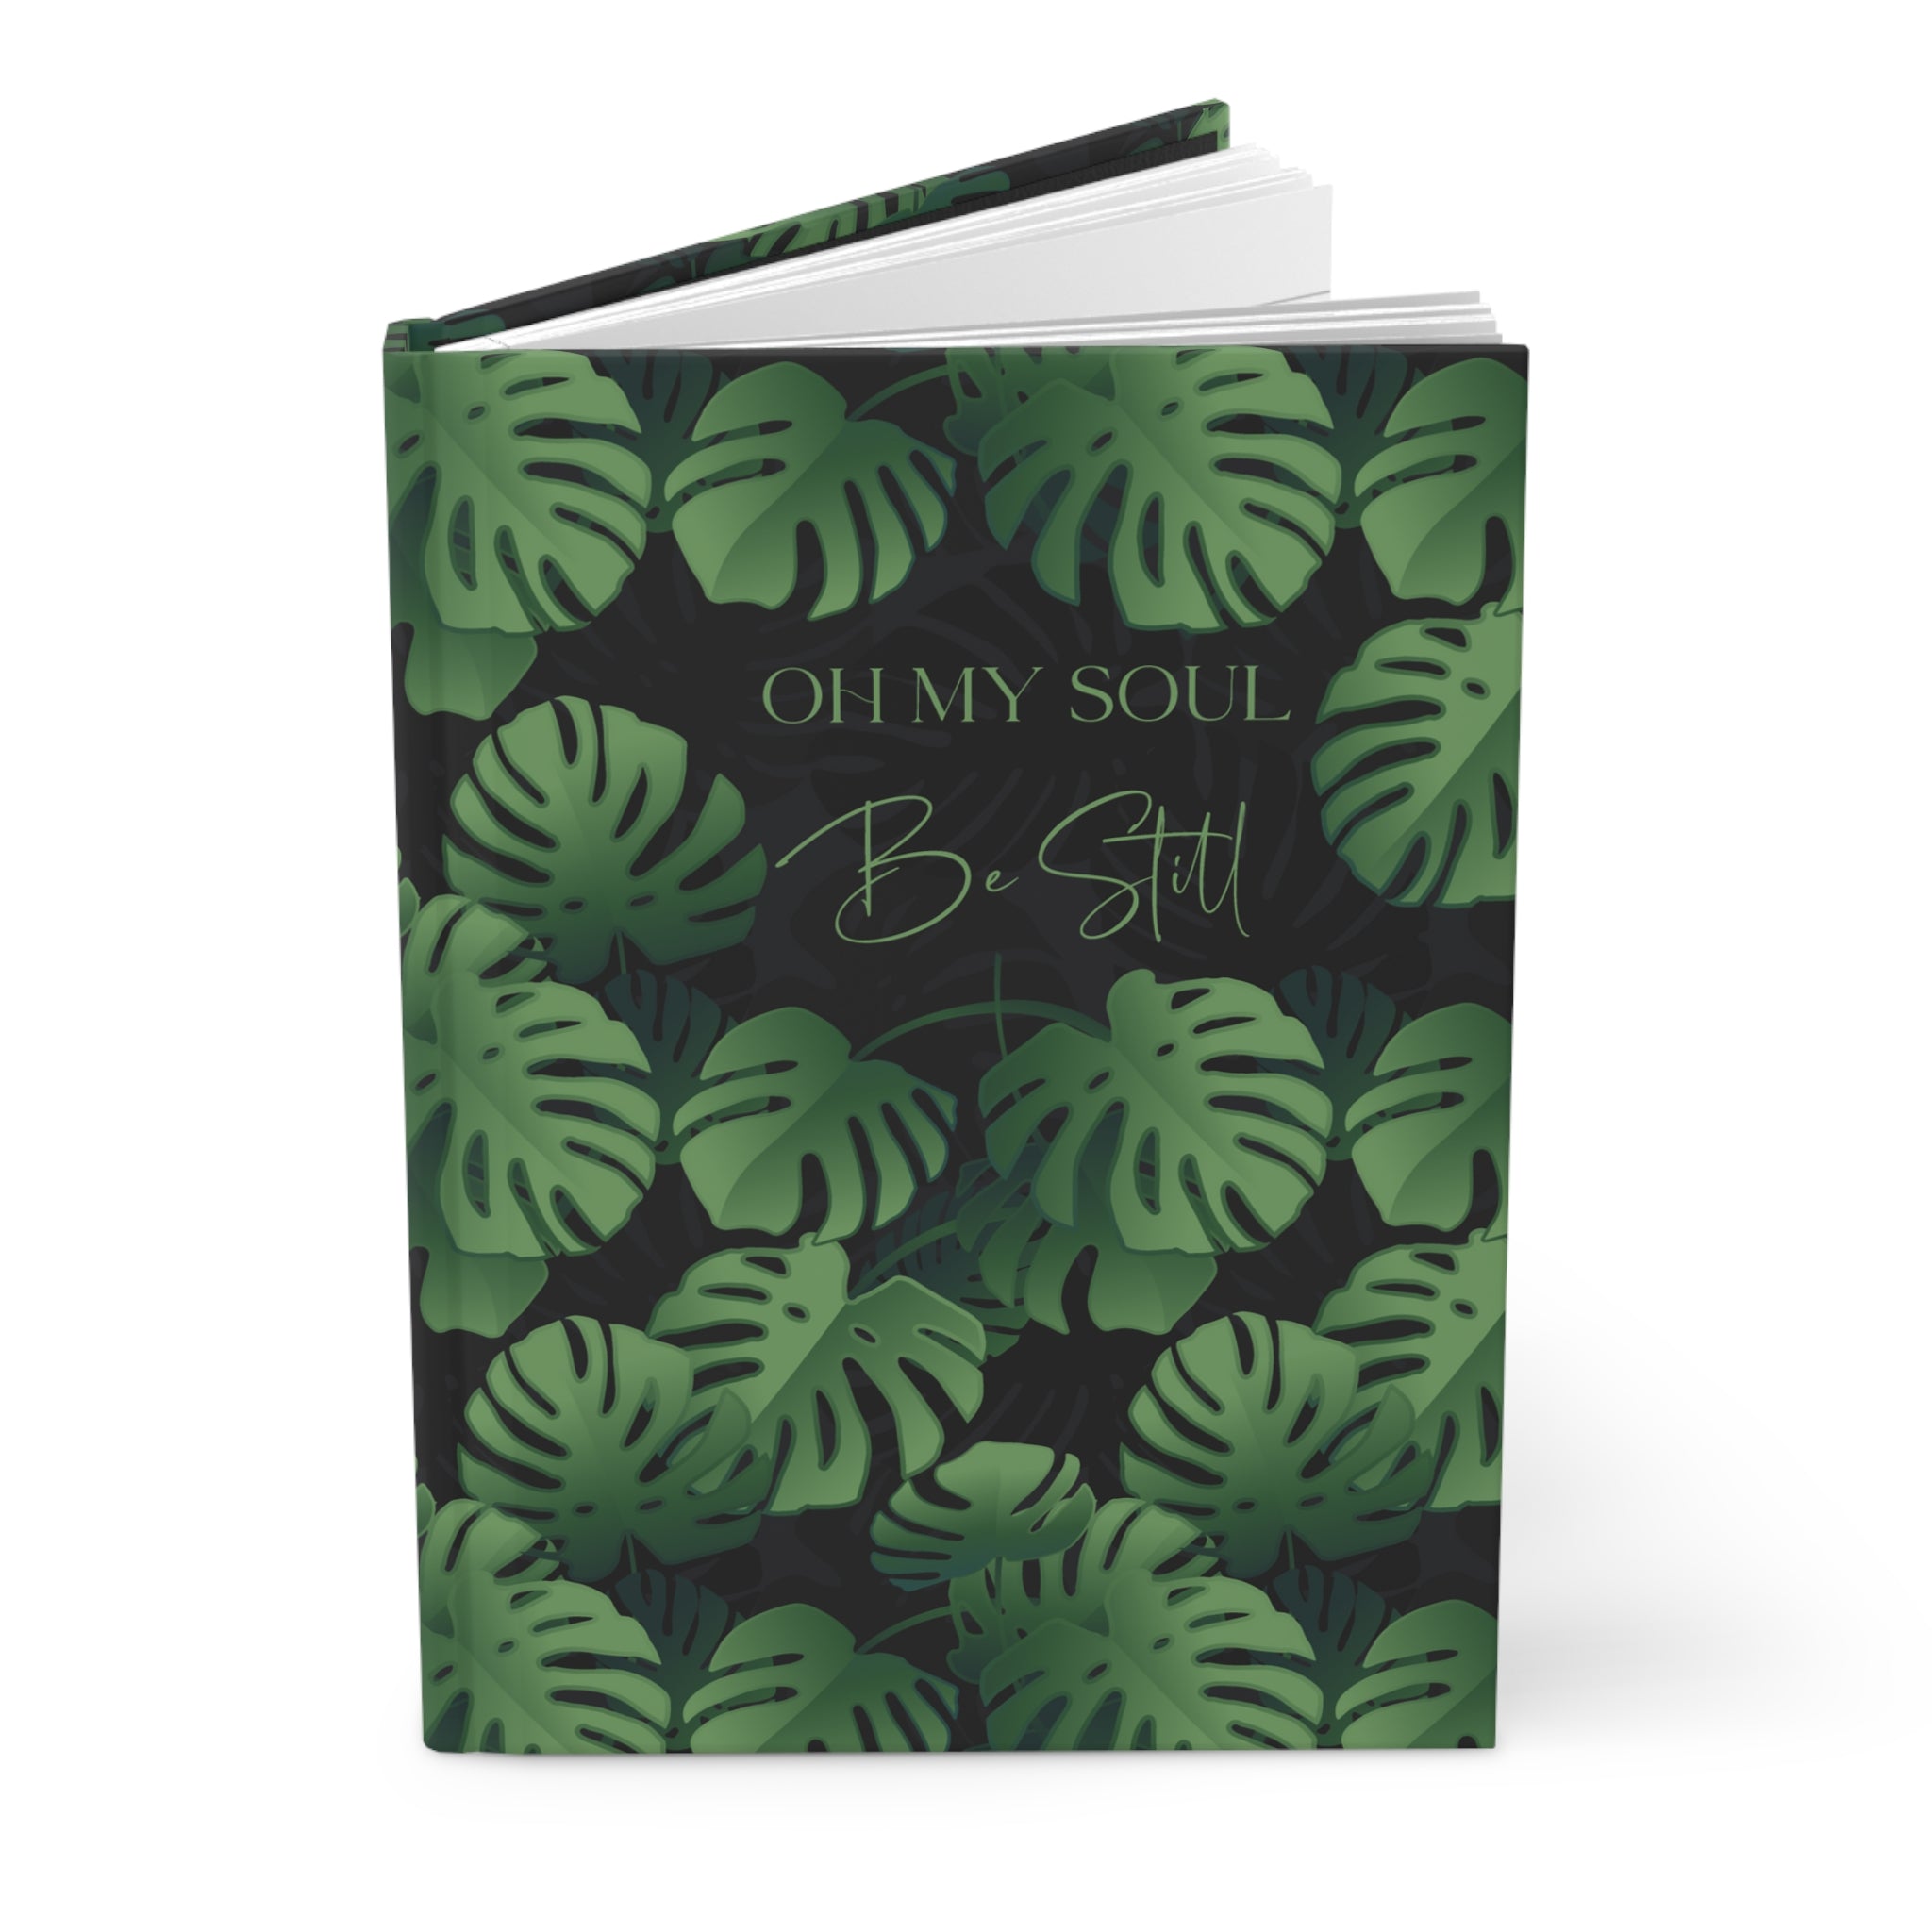 Oh My Soul Be Still all over print hardcover journal notebook